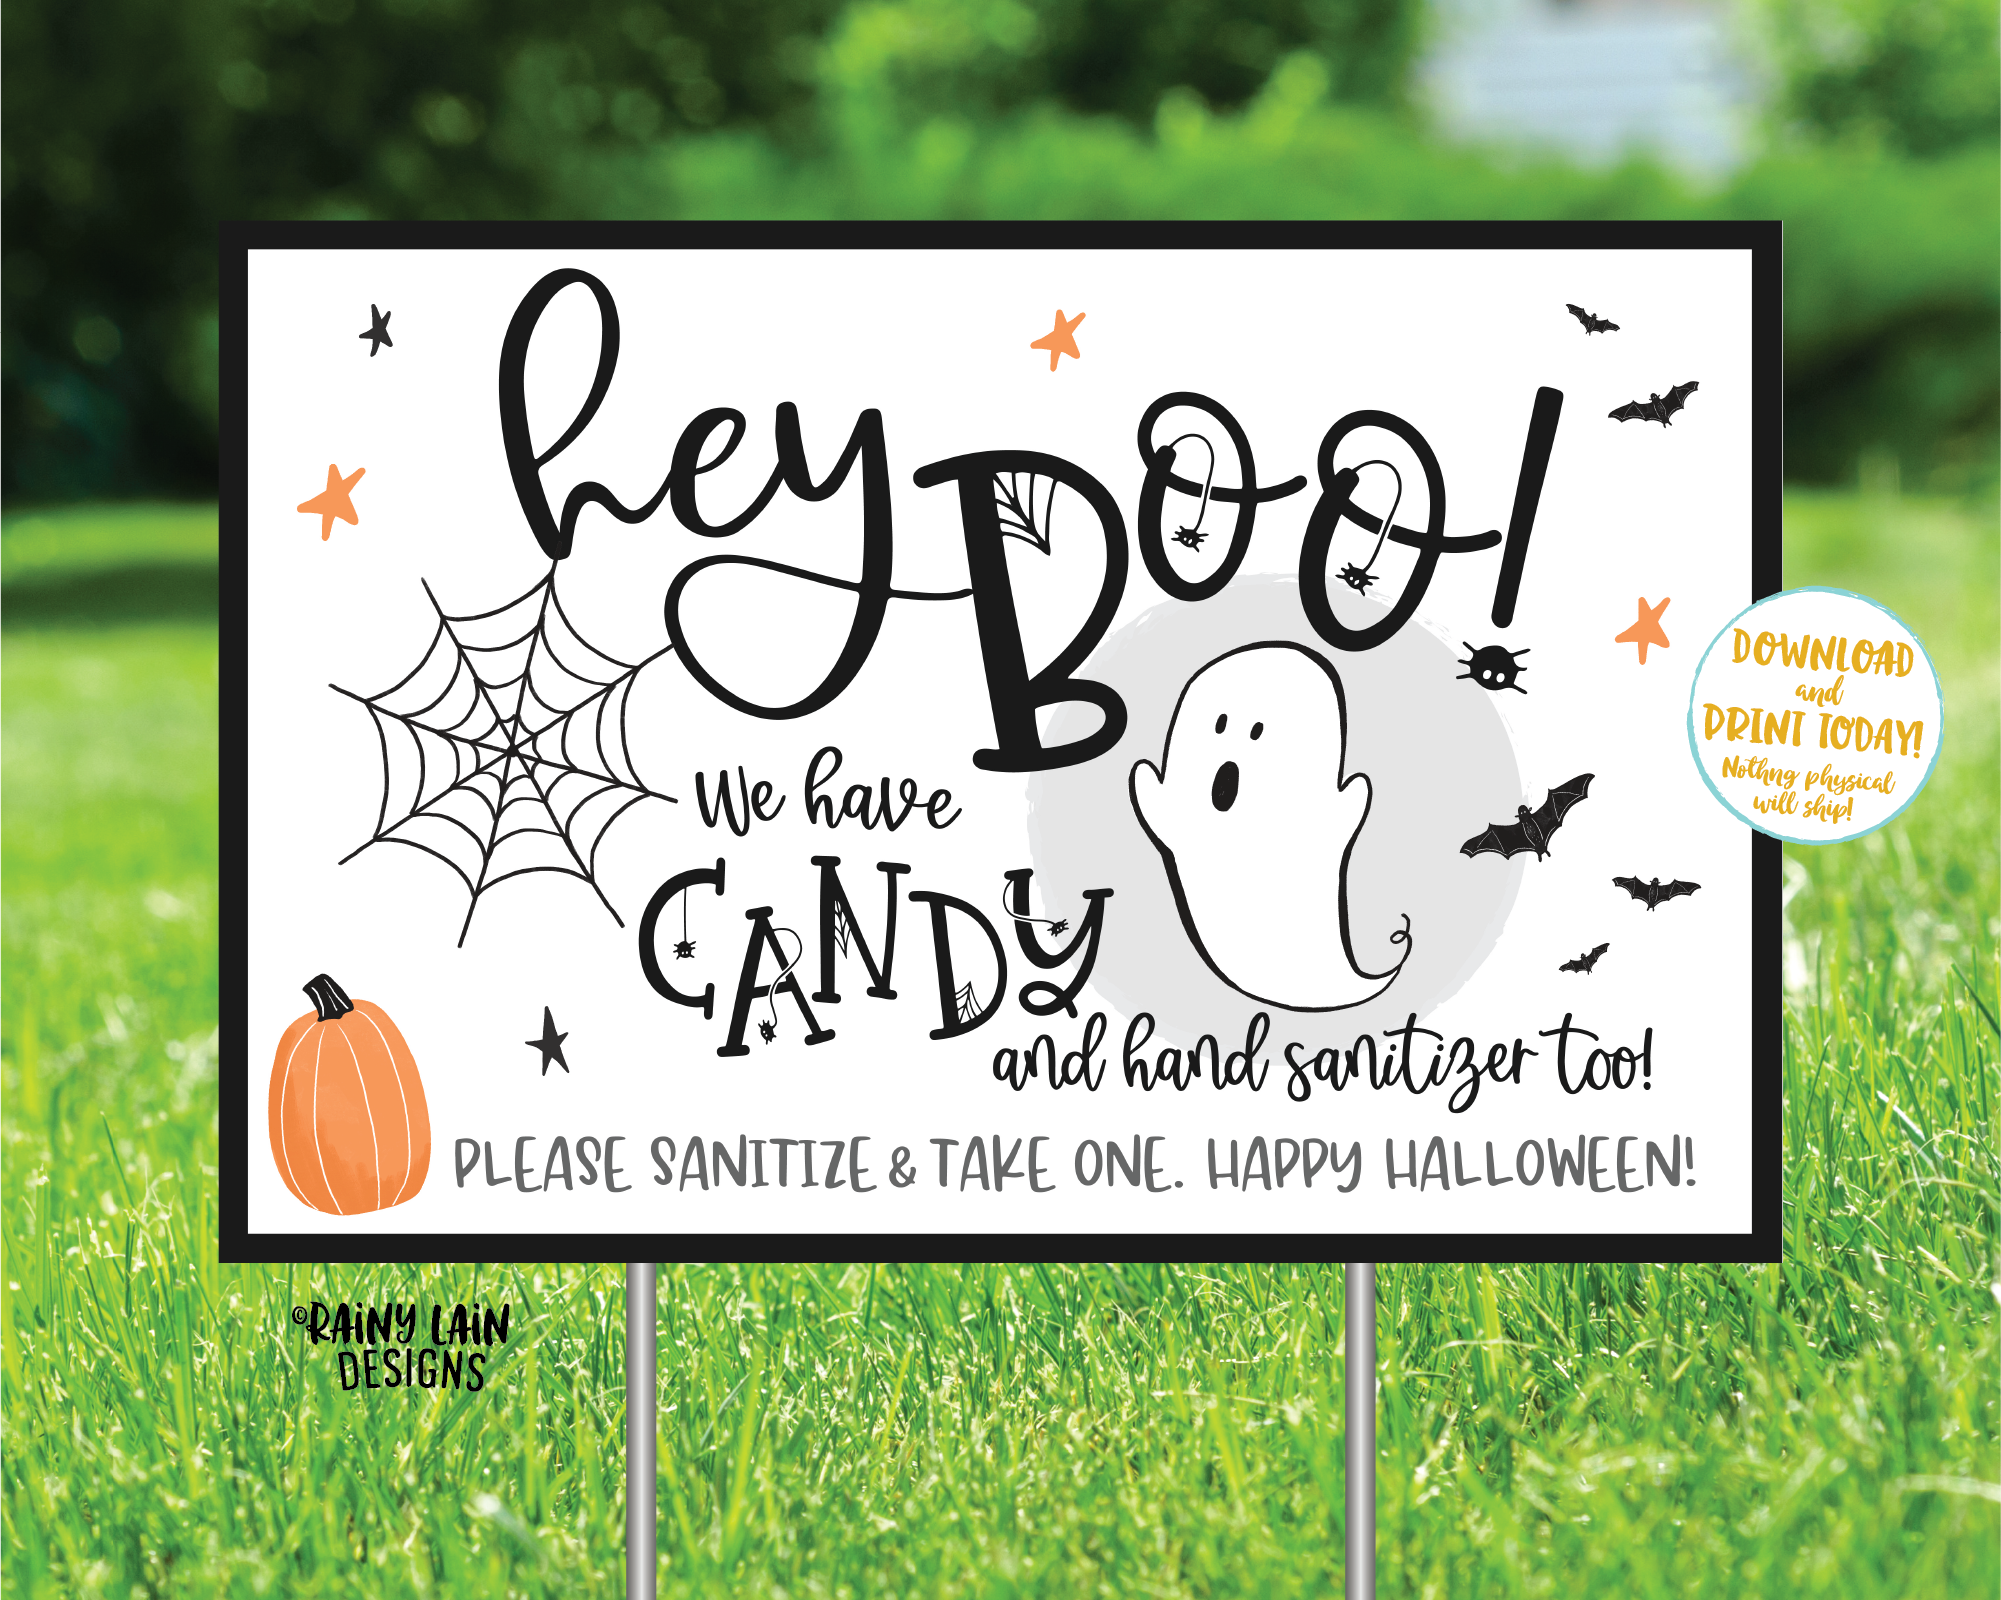 Hey Boo Halloween Yard Sign, Halloween Sign, We have candy, Hand Sanitizer, Trick or Treat Sanitize, Quarantine, Social Distancing, 2020